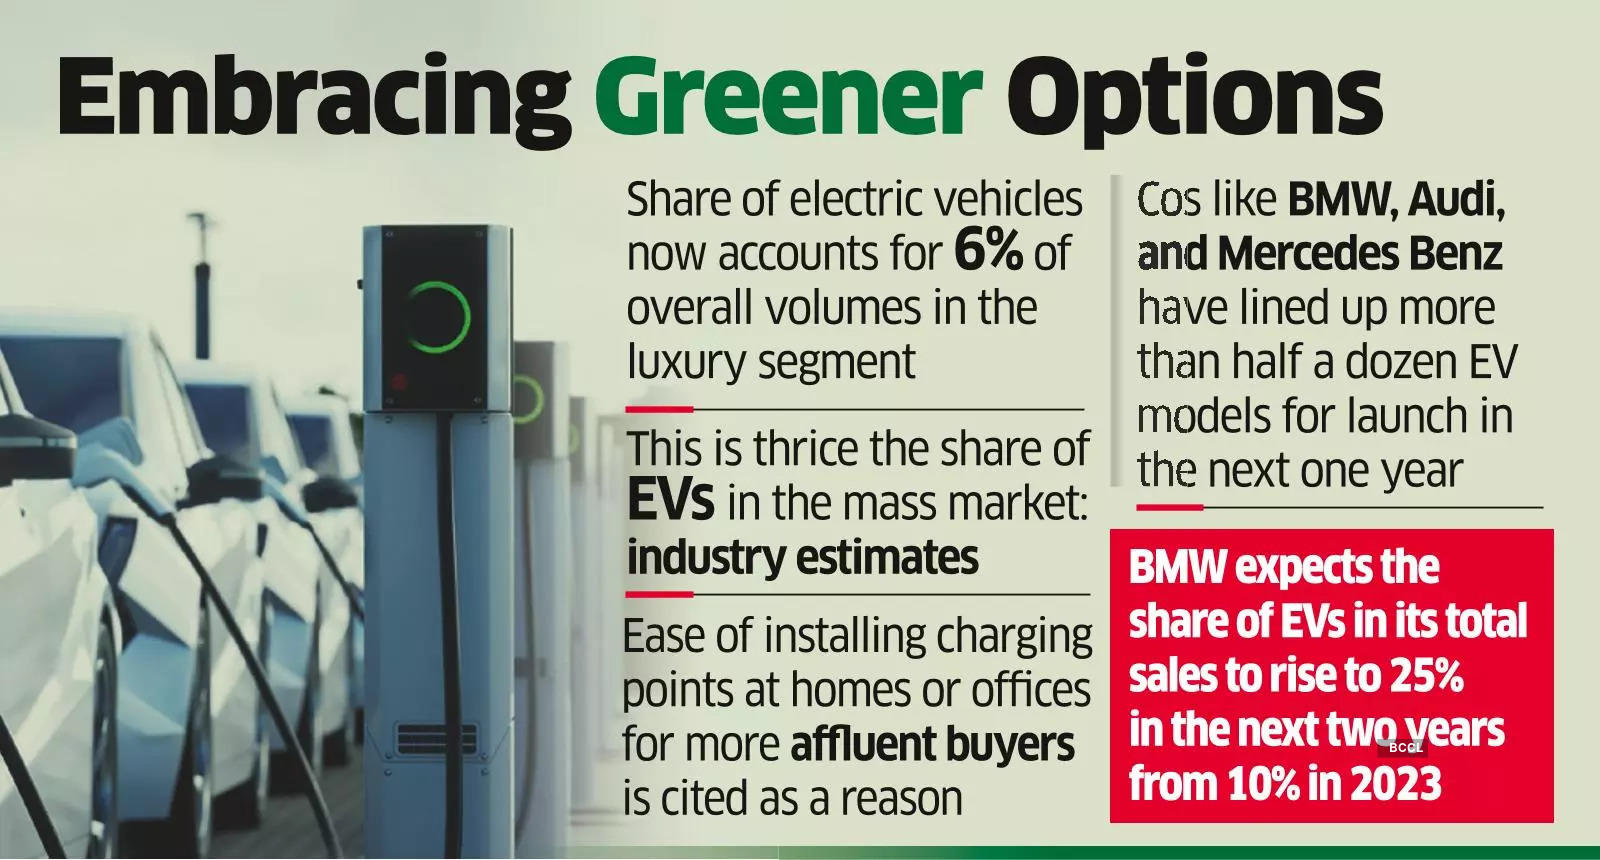 Indian luxury car buyers move from diesel to electric - The Economic Times